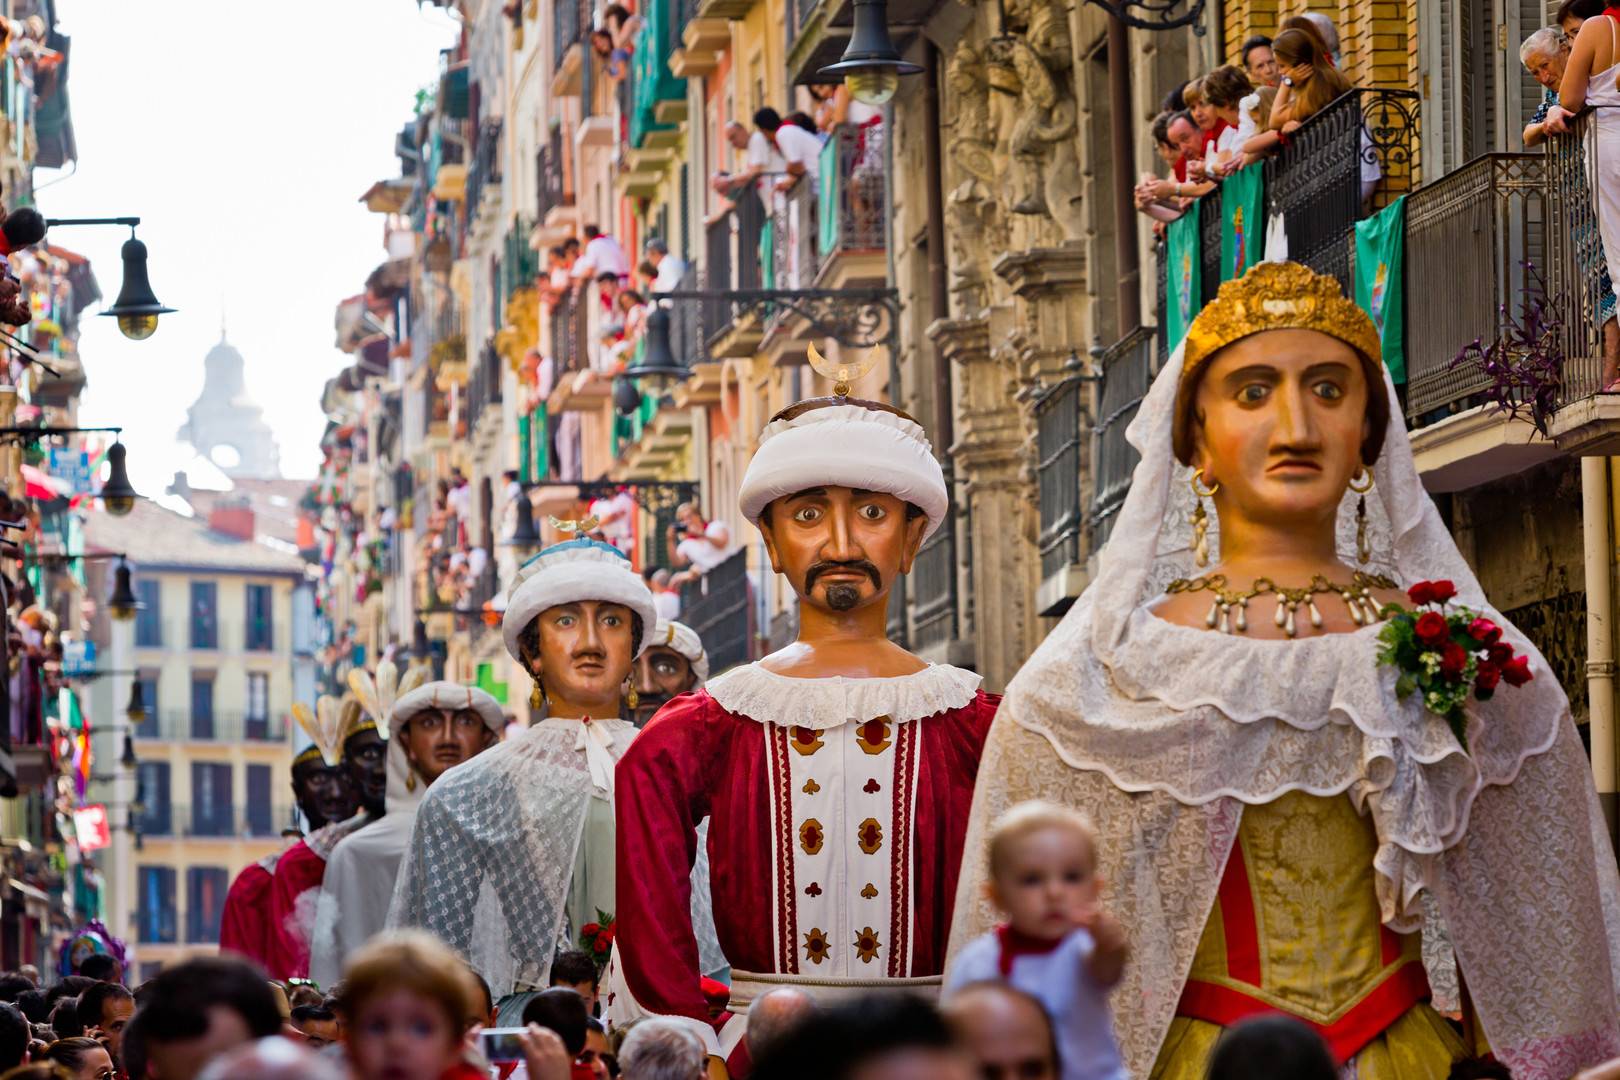 Guided tours of Pamplona in the San Fermín fiestas